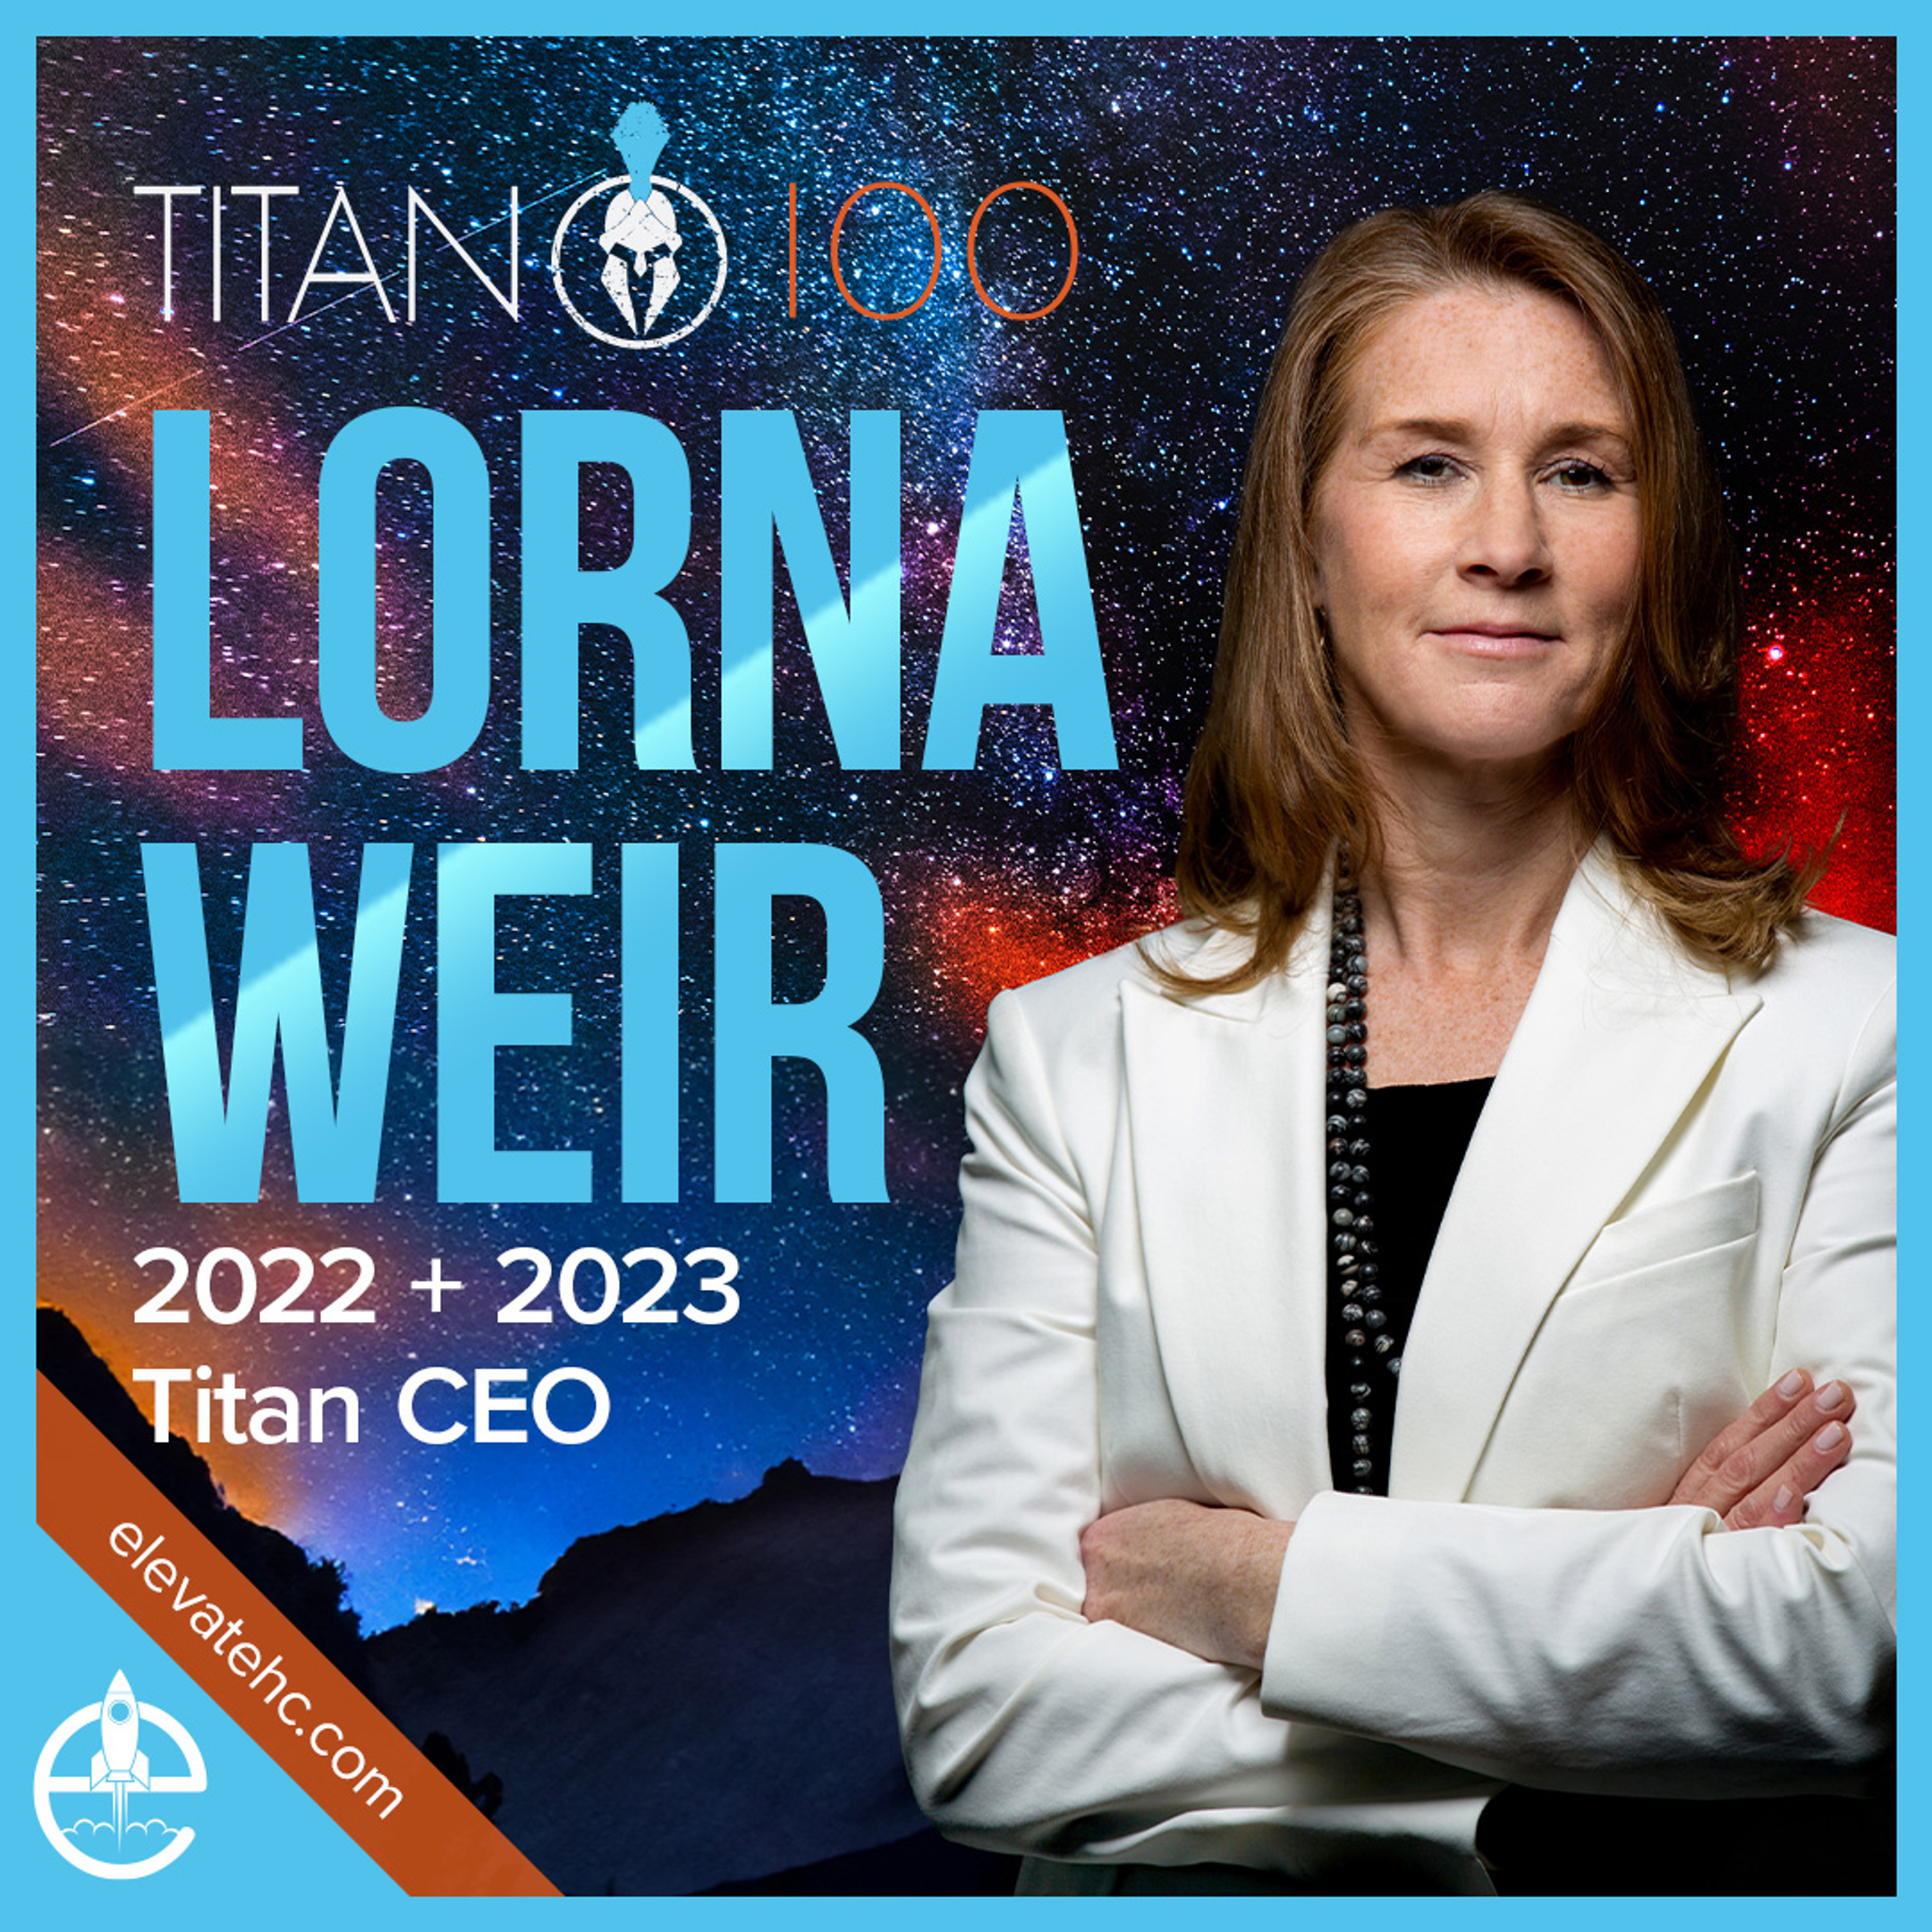 Elevate cofounder Lorna Weir named to second consecutive Philadelphia TITAN 100.